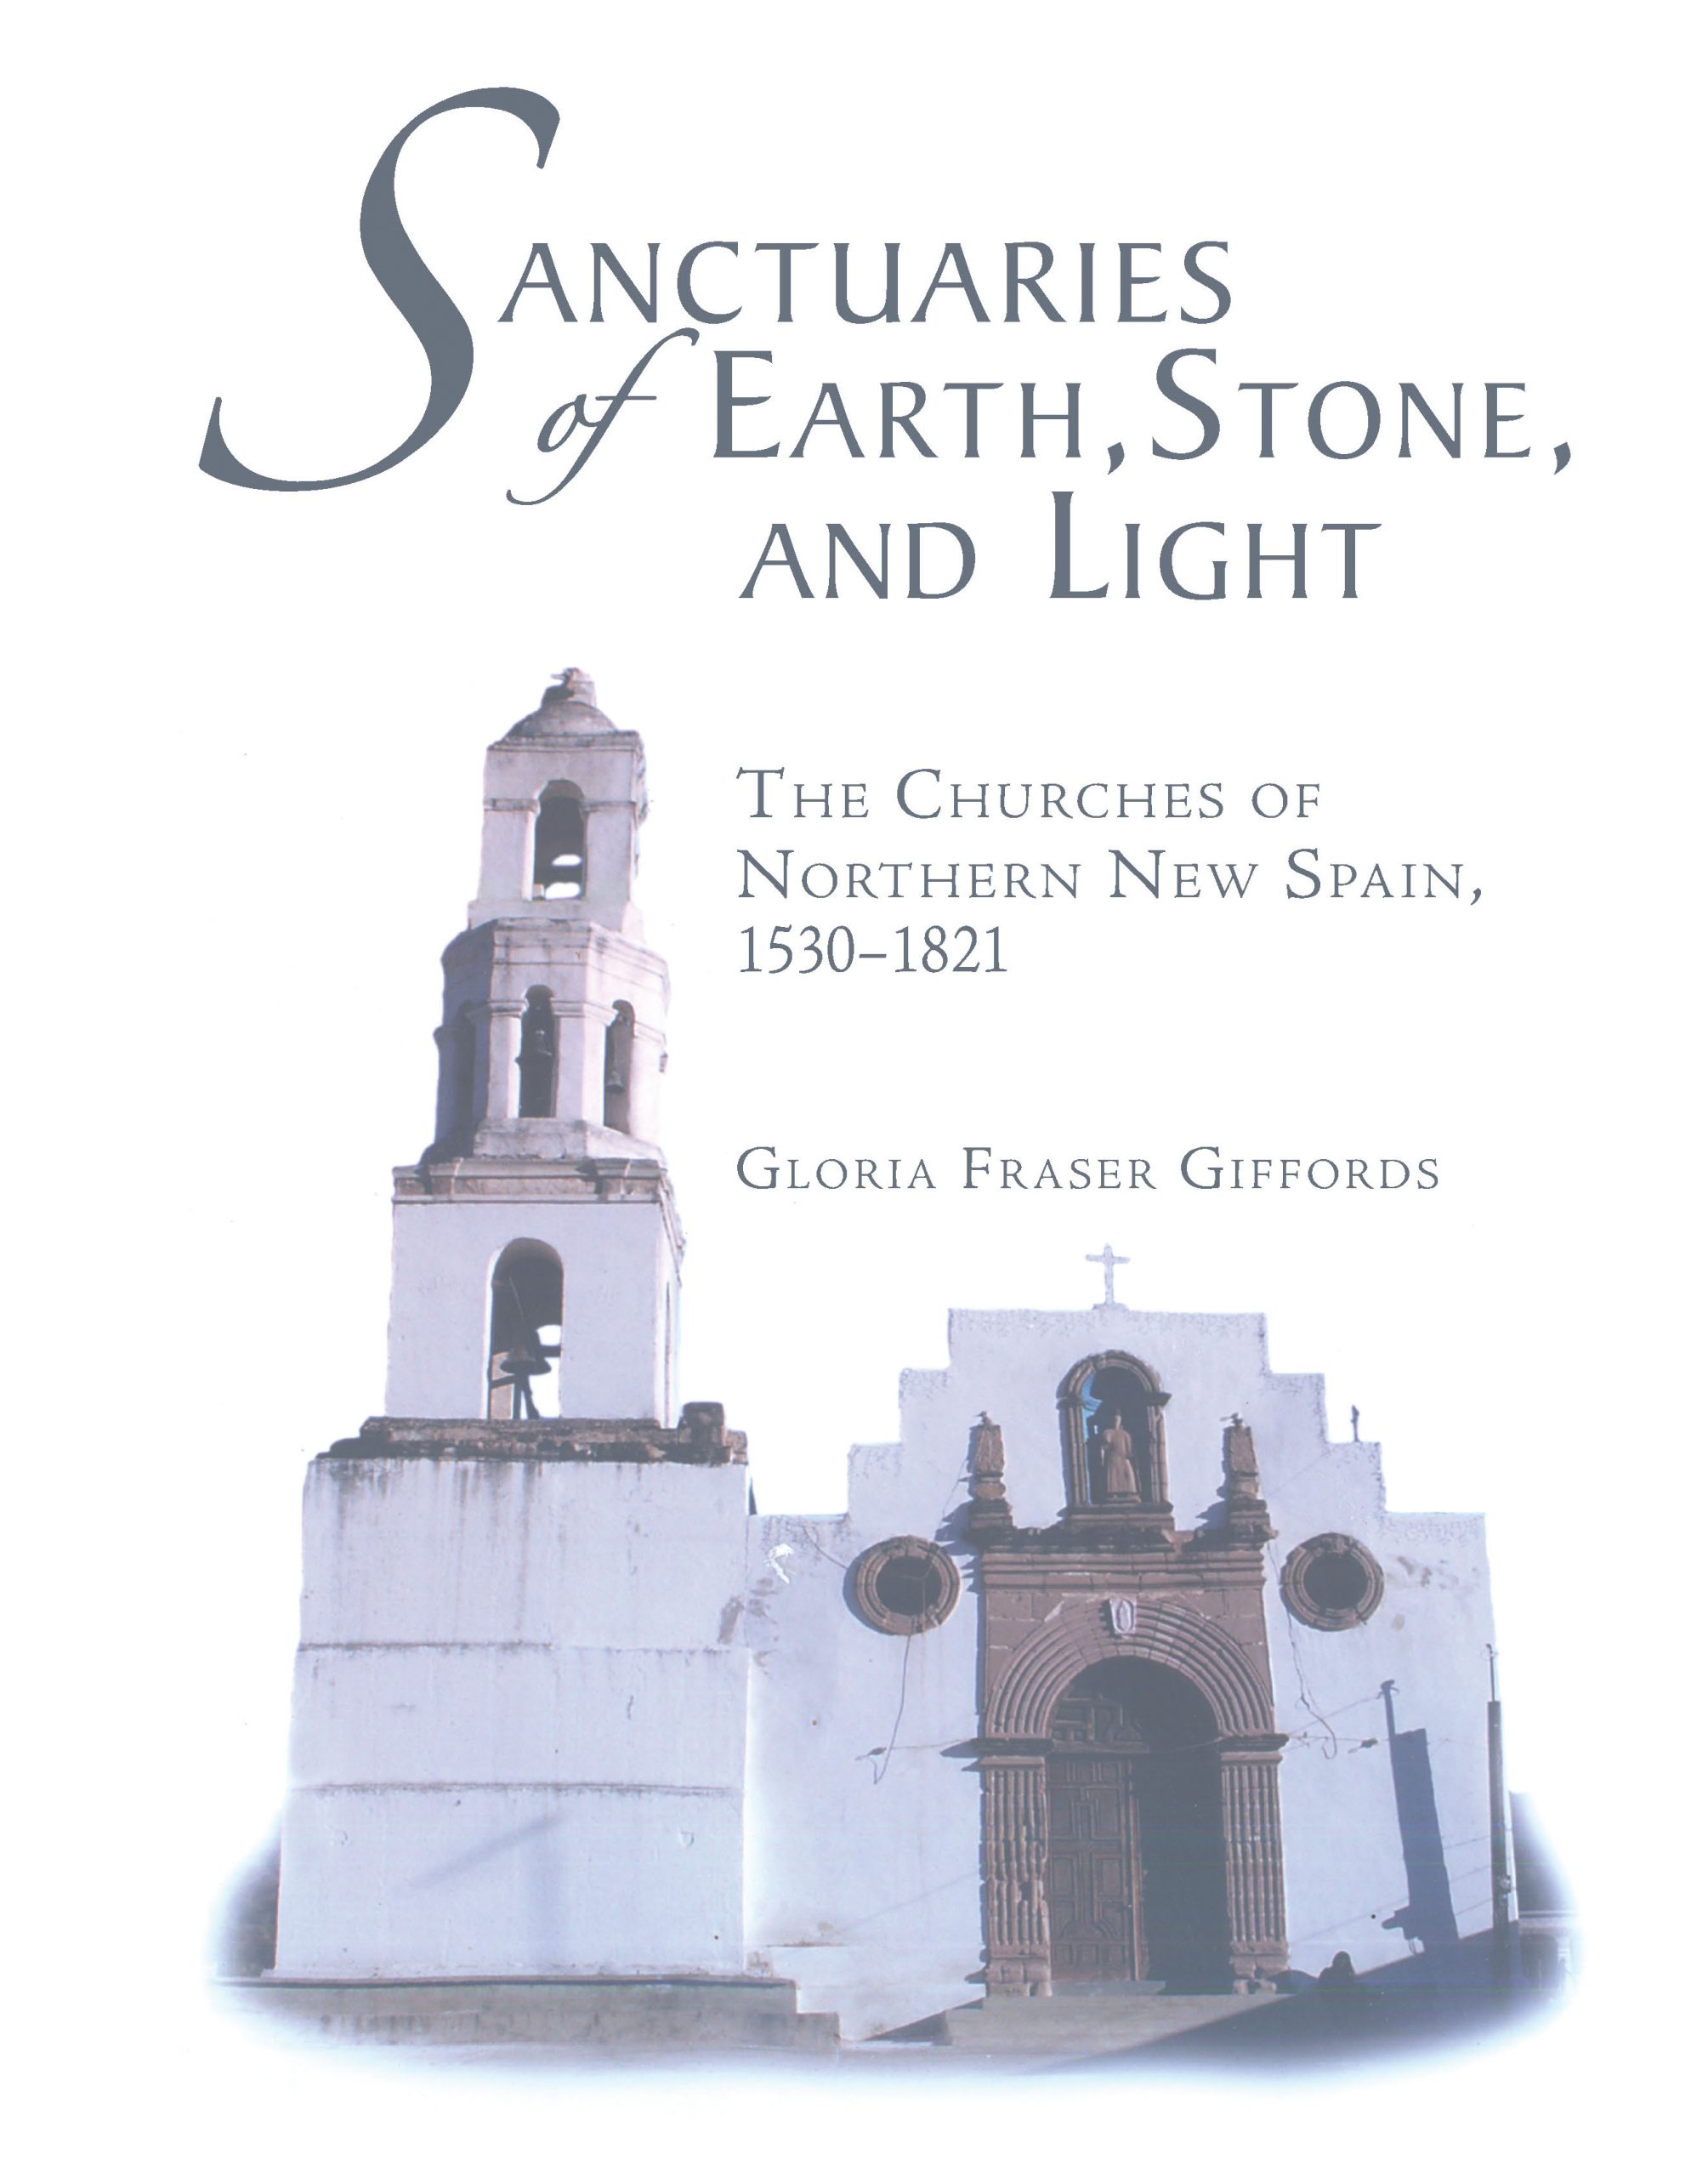 Sanctuaries of Earth, Stone, and Light